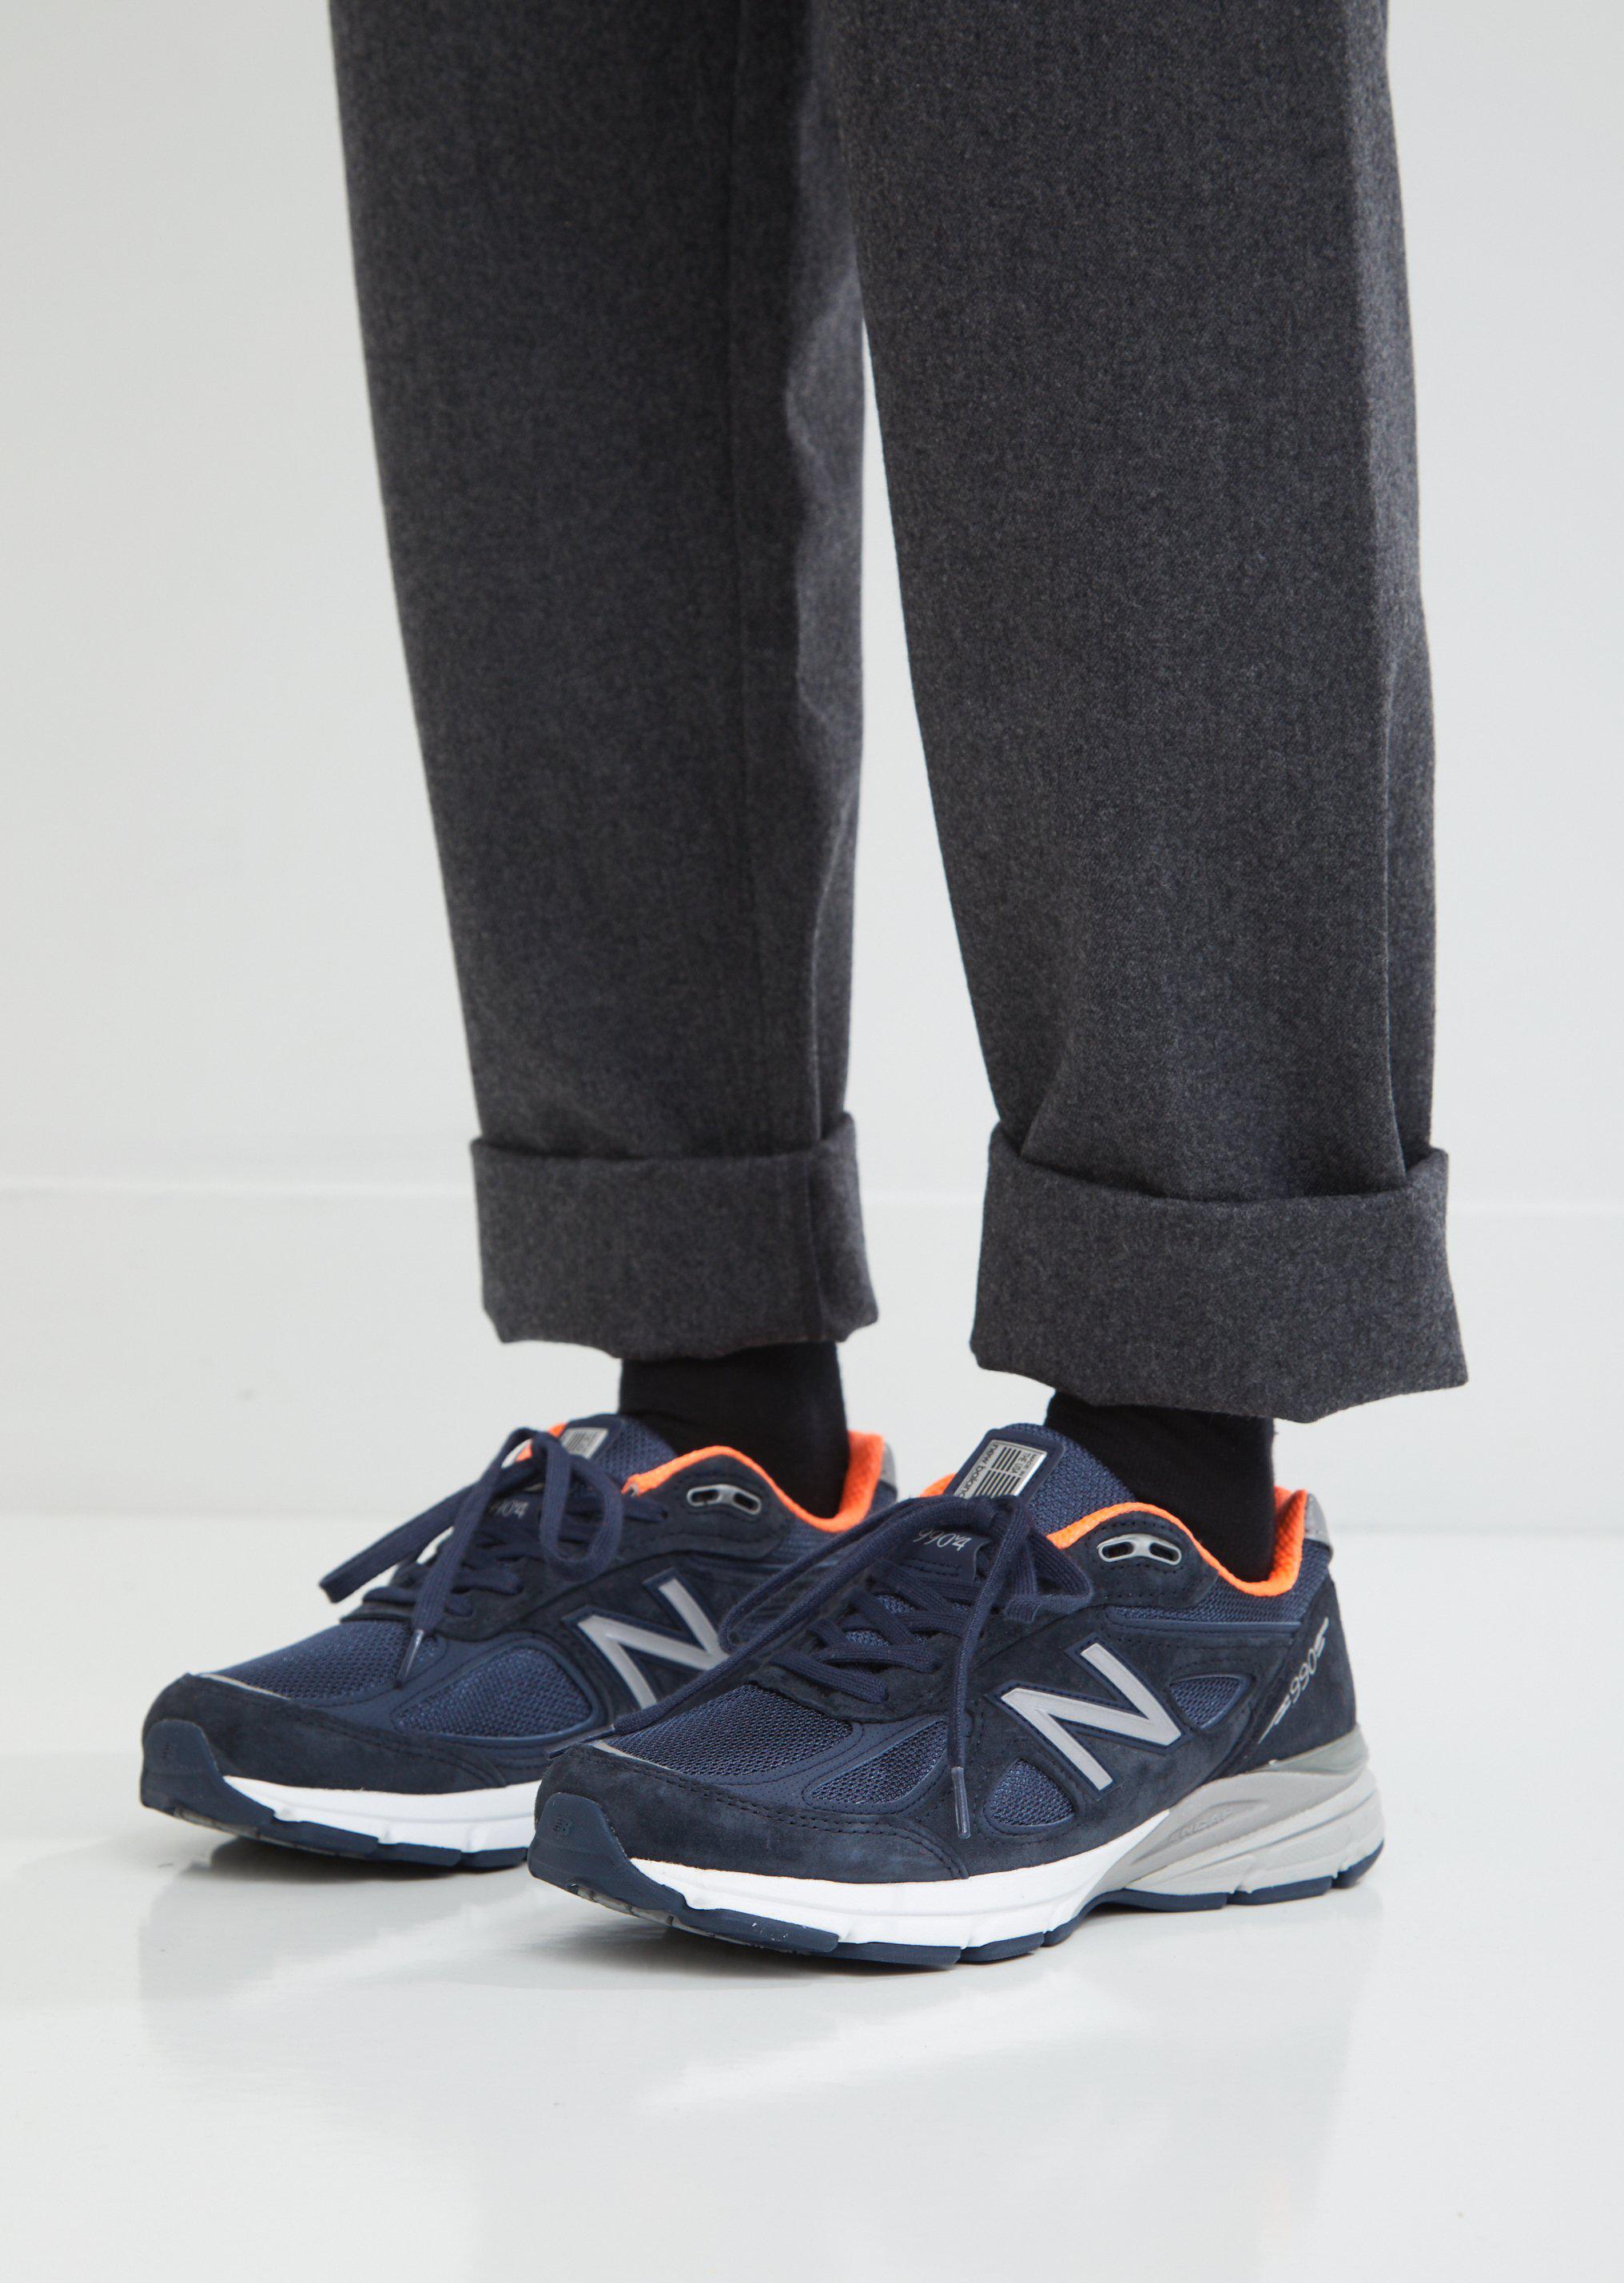 New Balance Lace 990v4 Sneakers in Navy / Orange (Blue) for Men - Lyst